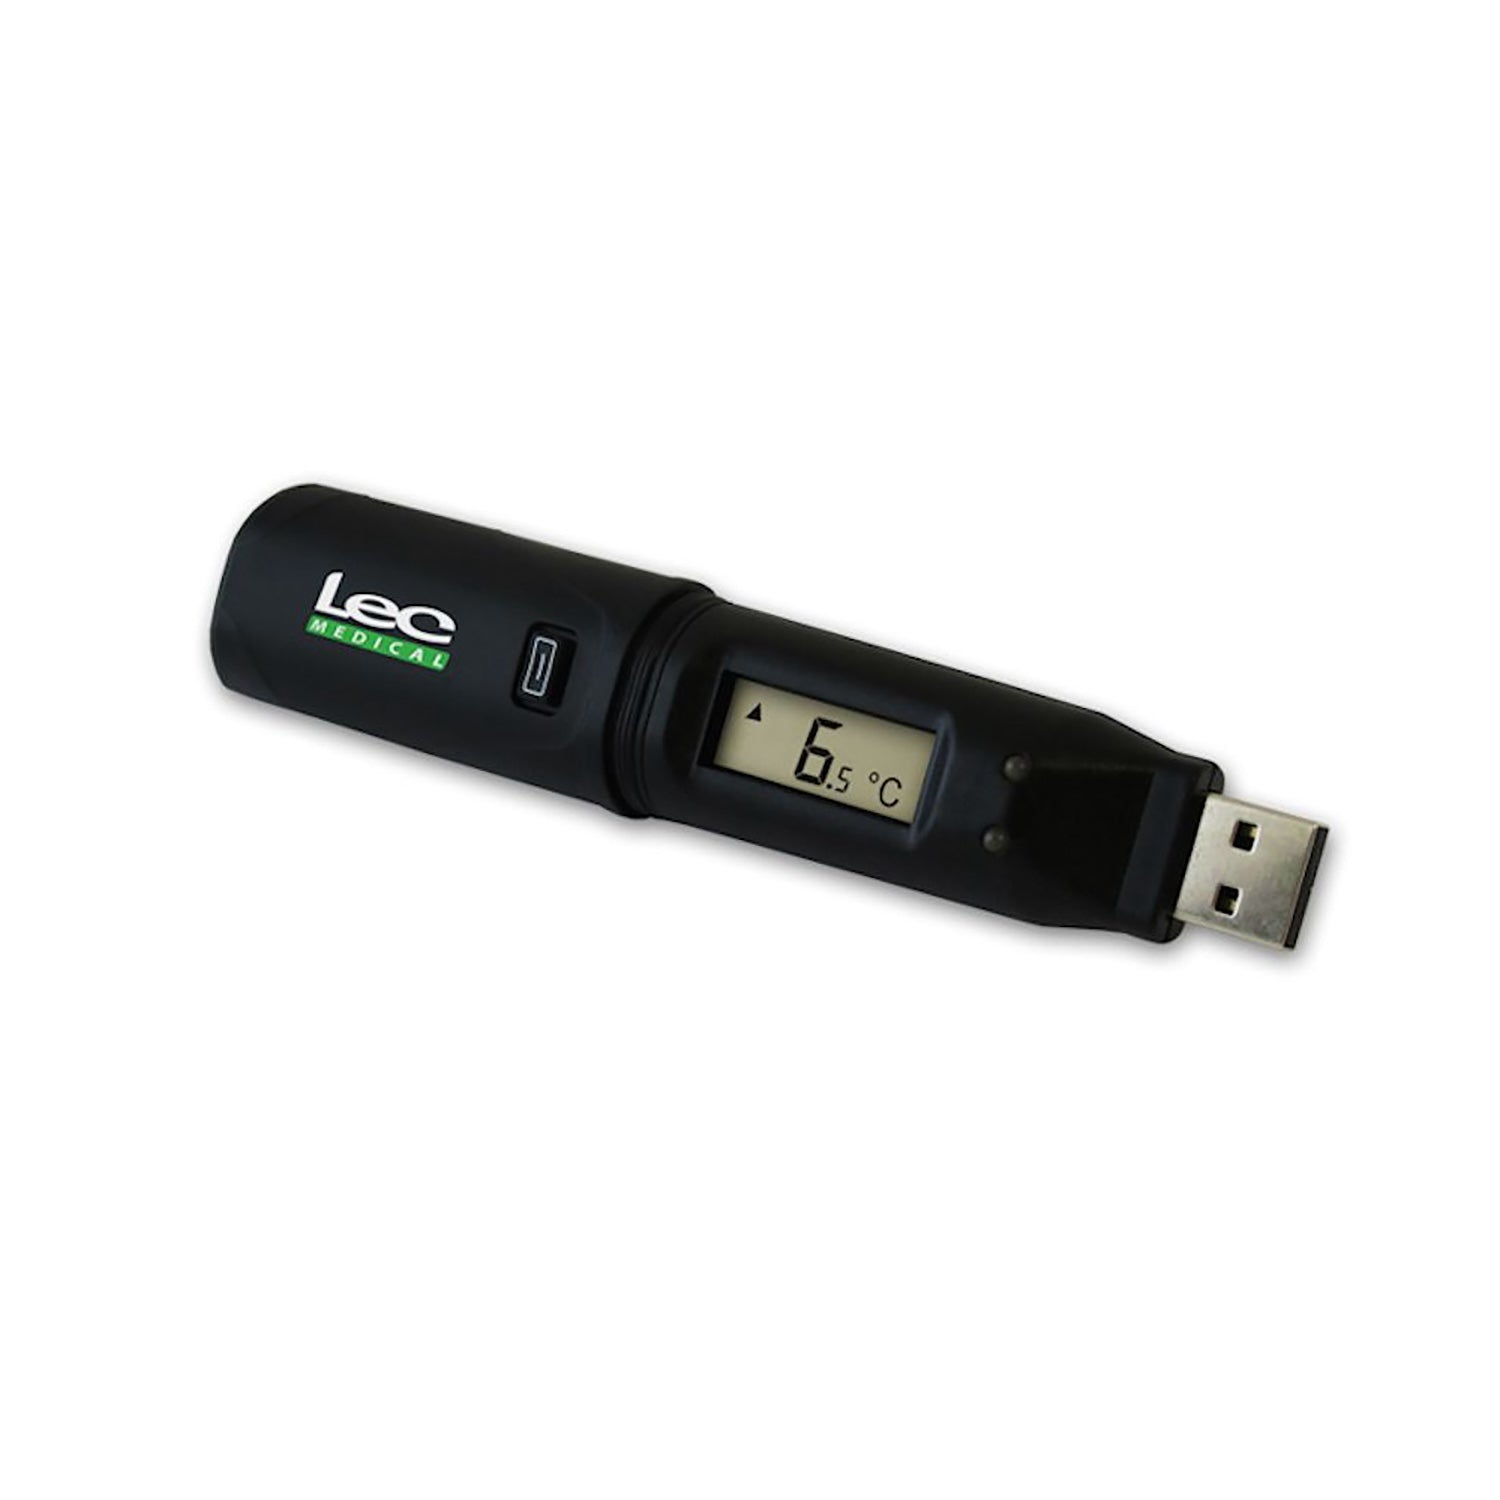 ATMDL-LCD - Calibrated USB Temperature Data Logger with LCD display